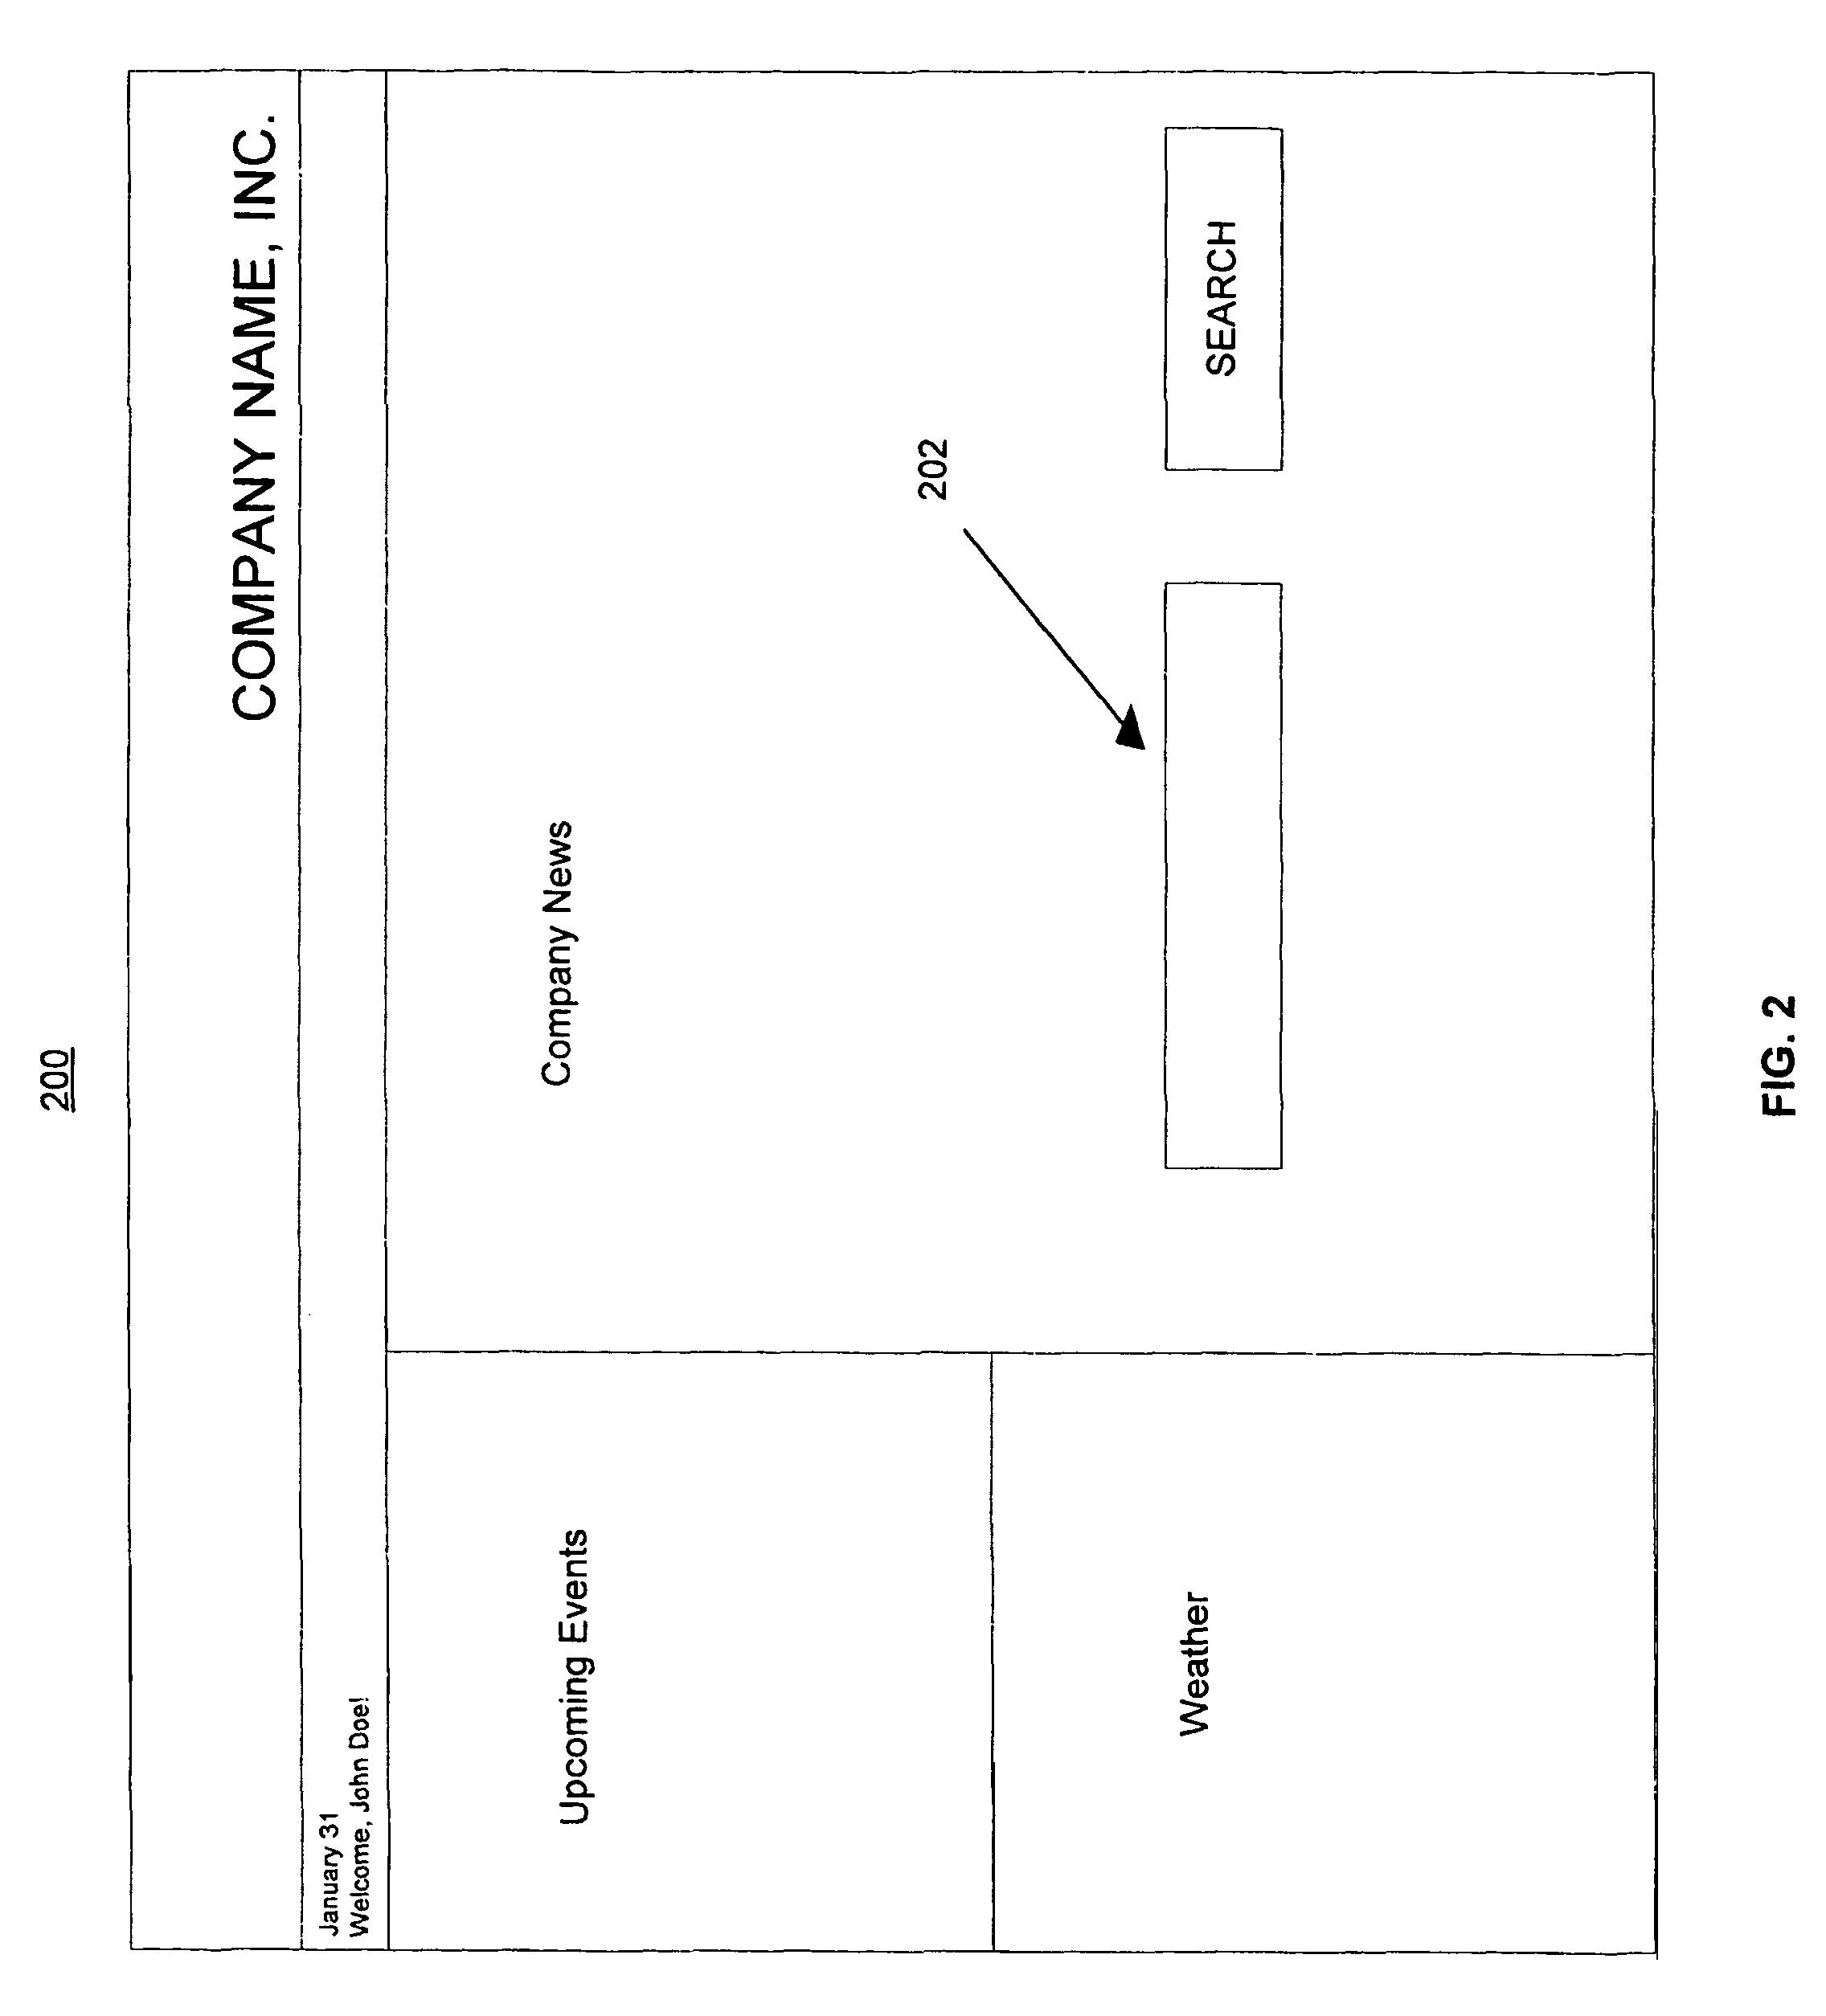 Method for displaying usage metrics as part of search results